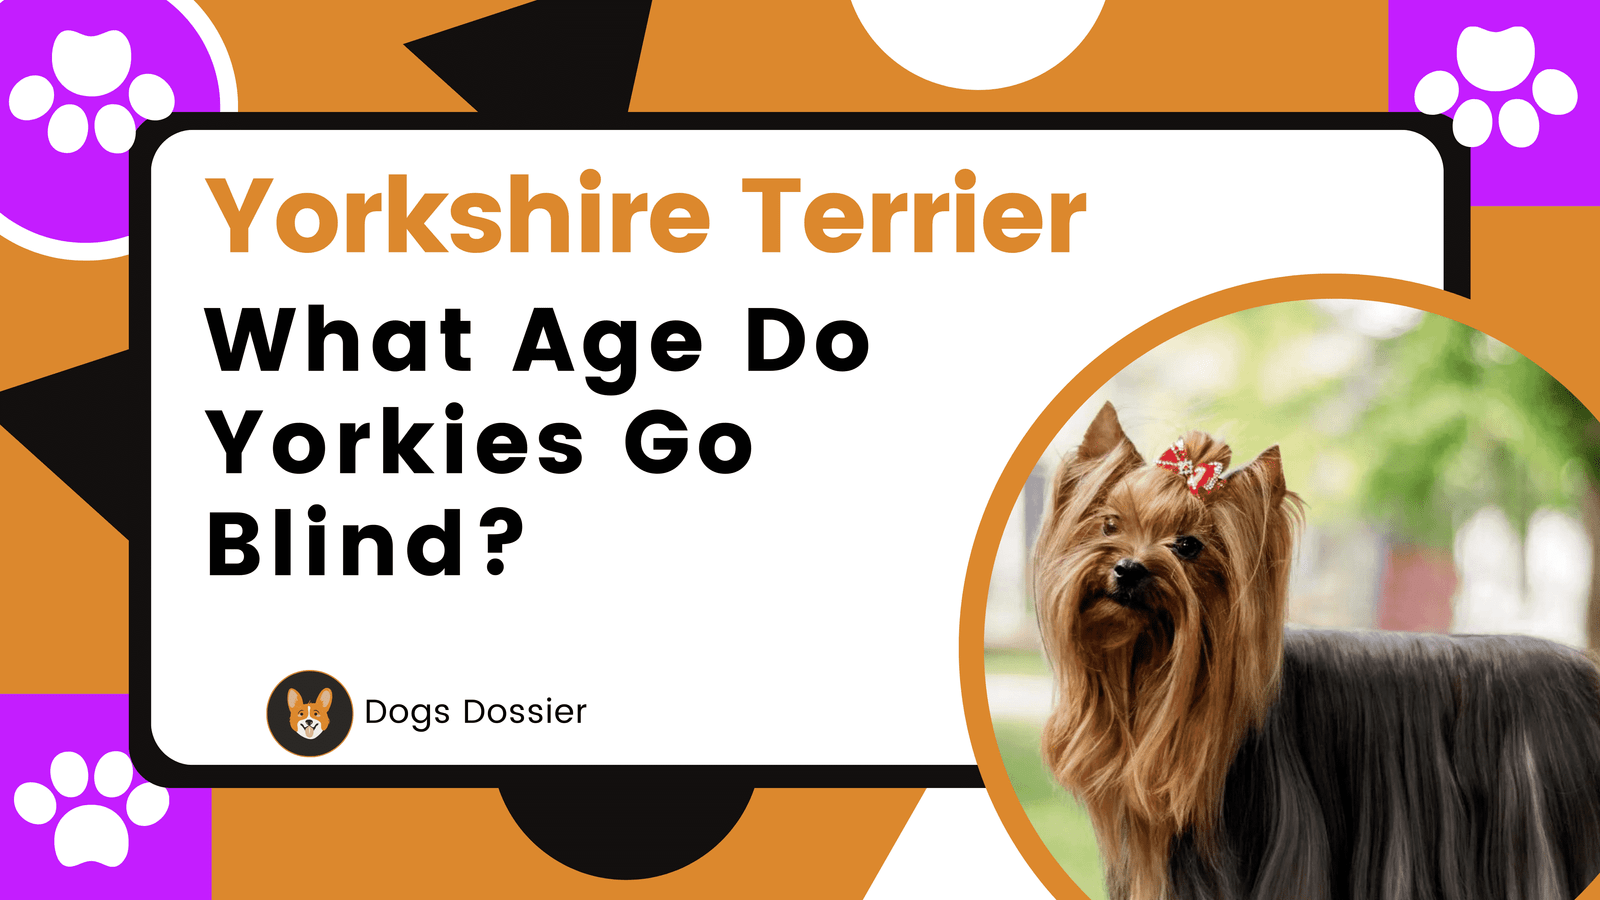 What Age Do Yorkies Go Blind?